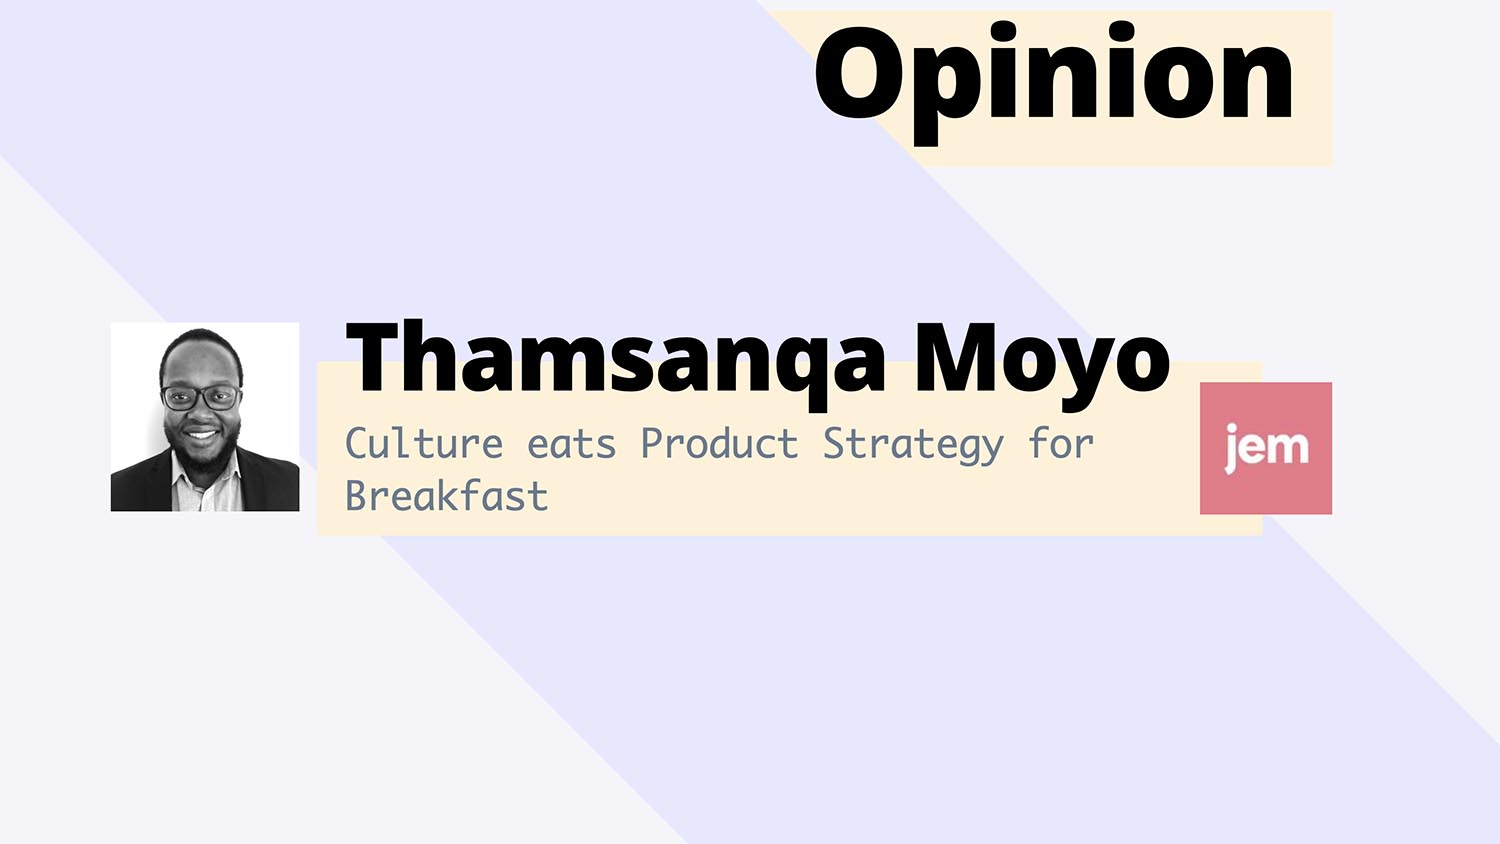 Culture eats Product Strategy for Breakfast